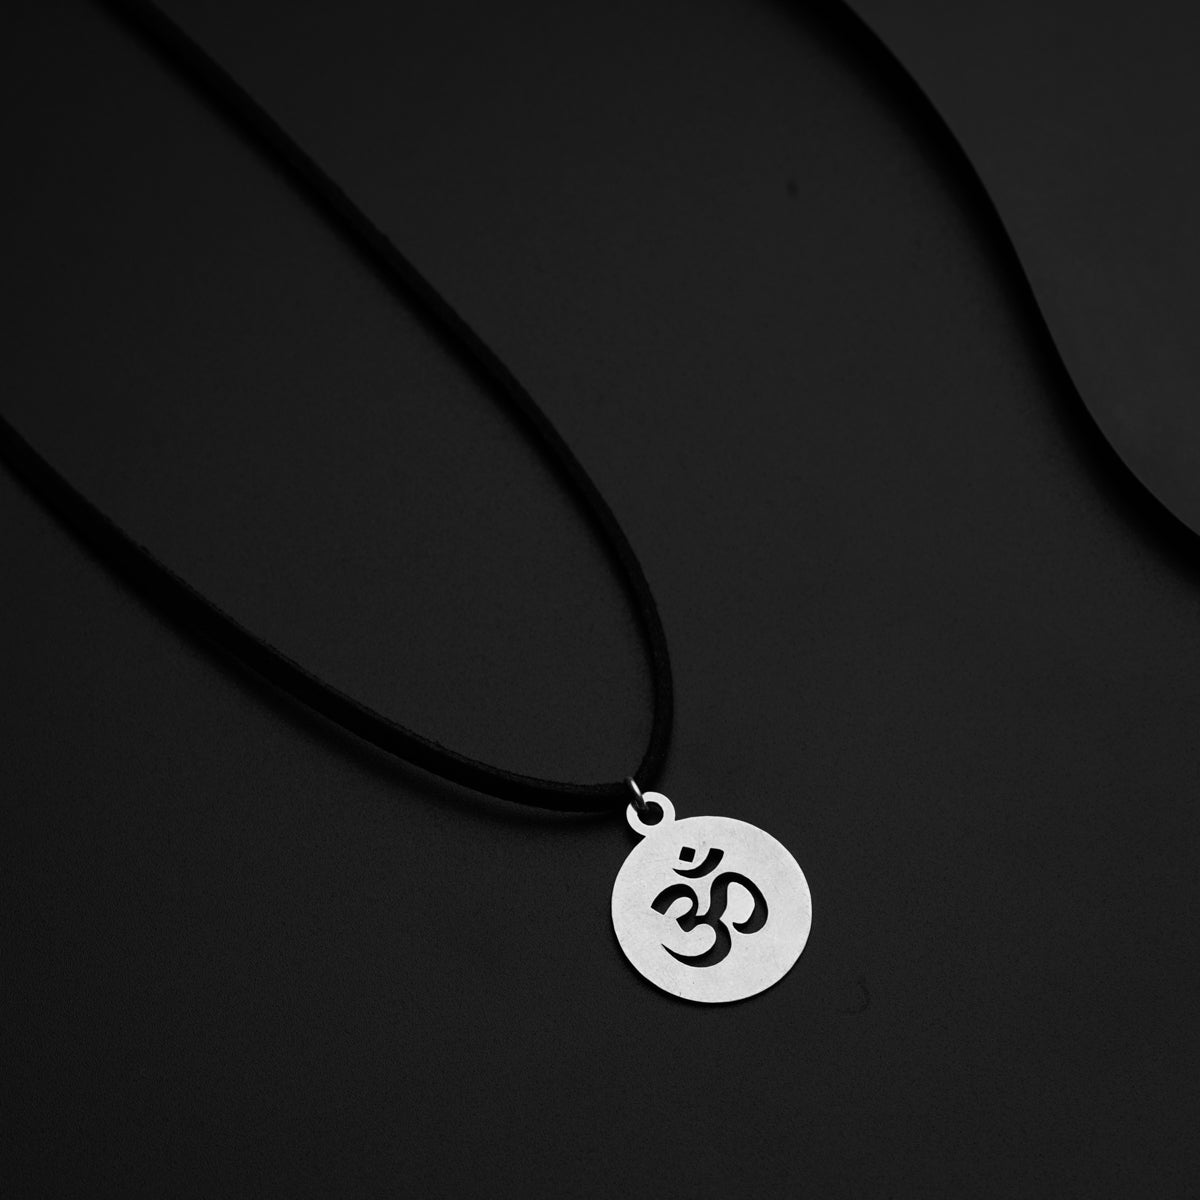 a necklace with an om symbol on a black background